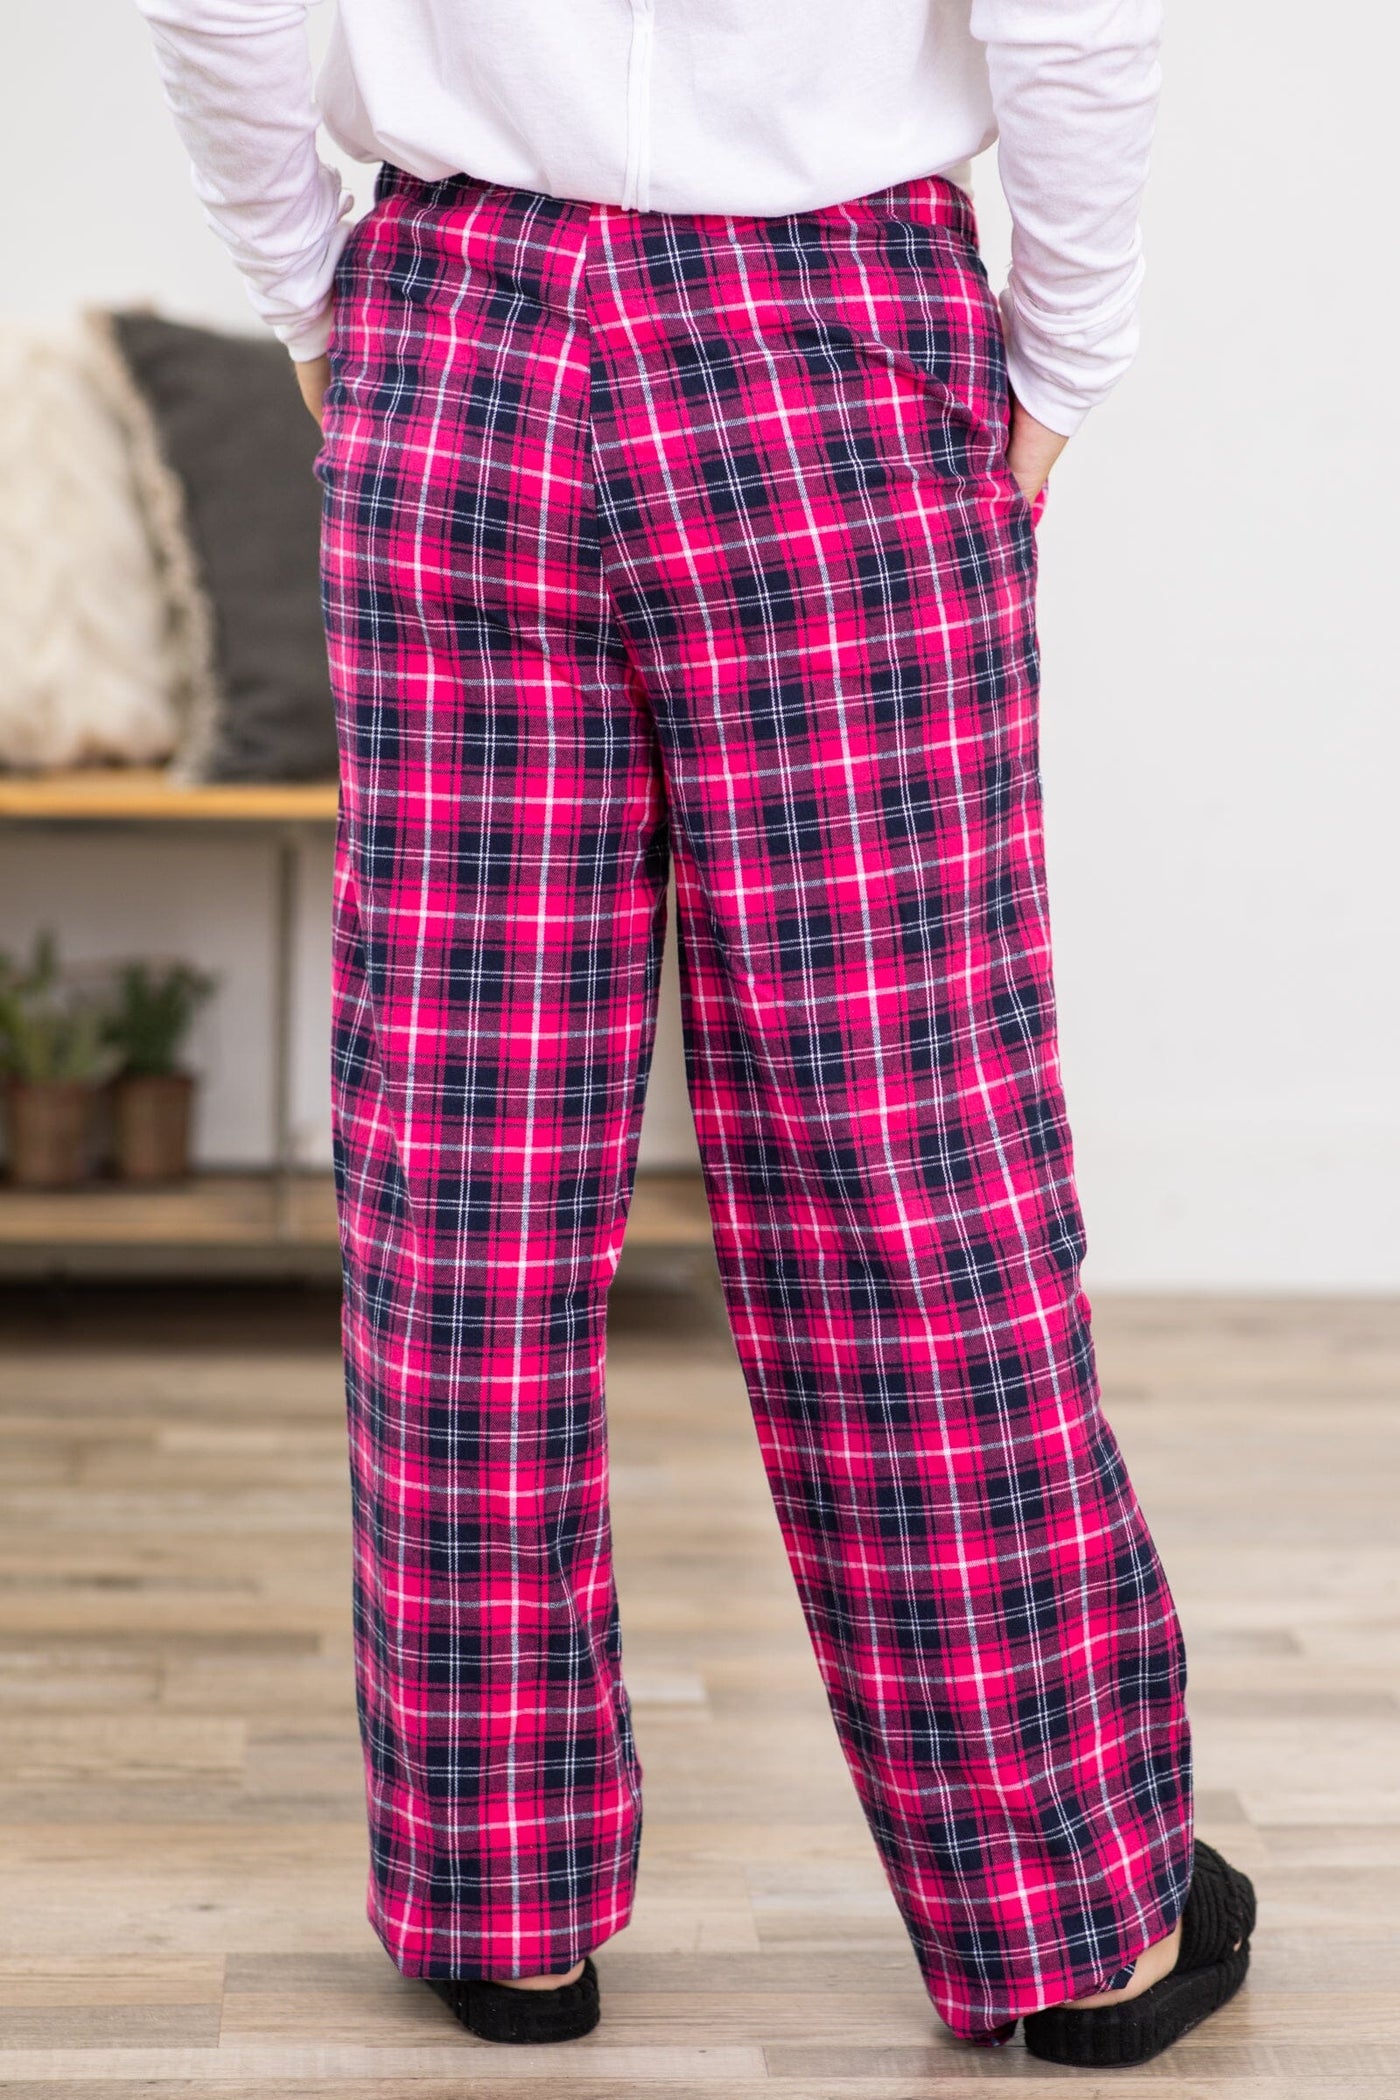 Pants Pink Navy Plaid and Lounge Filly Hot Flair ·